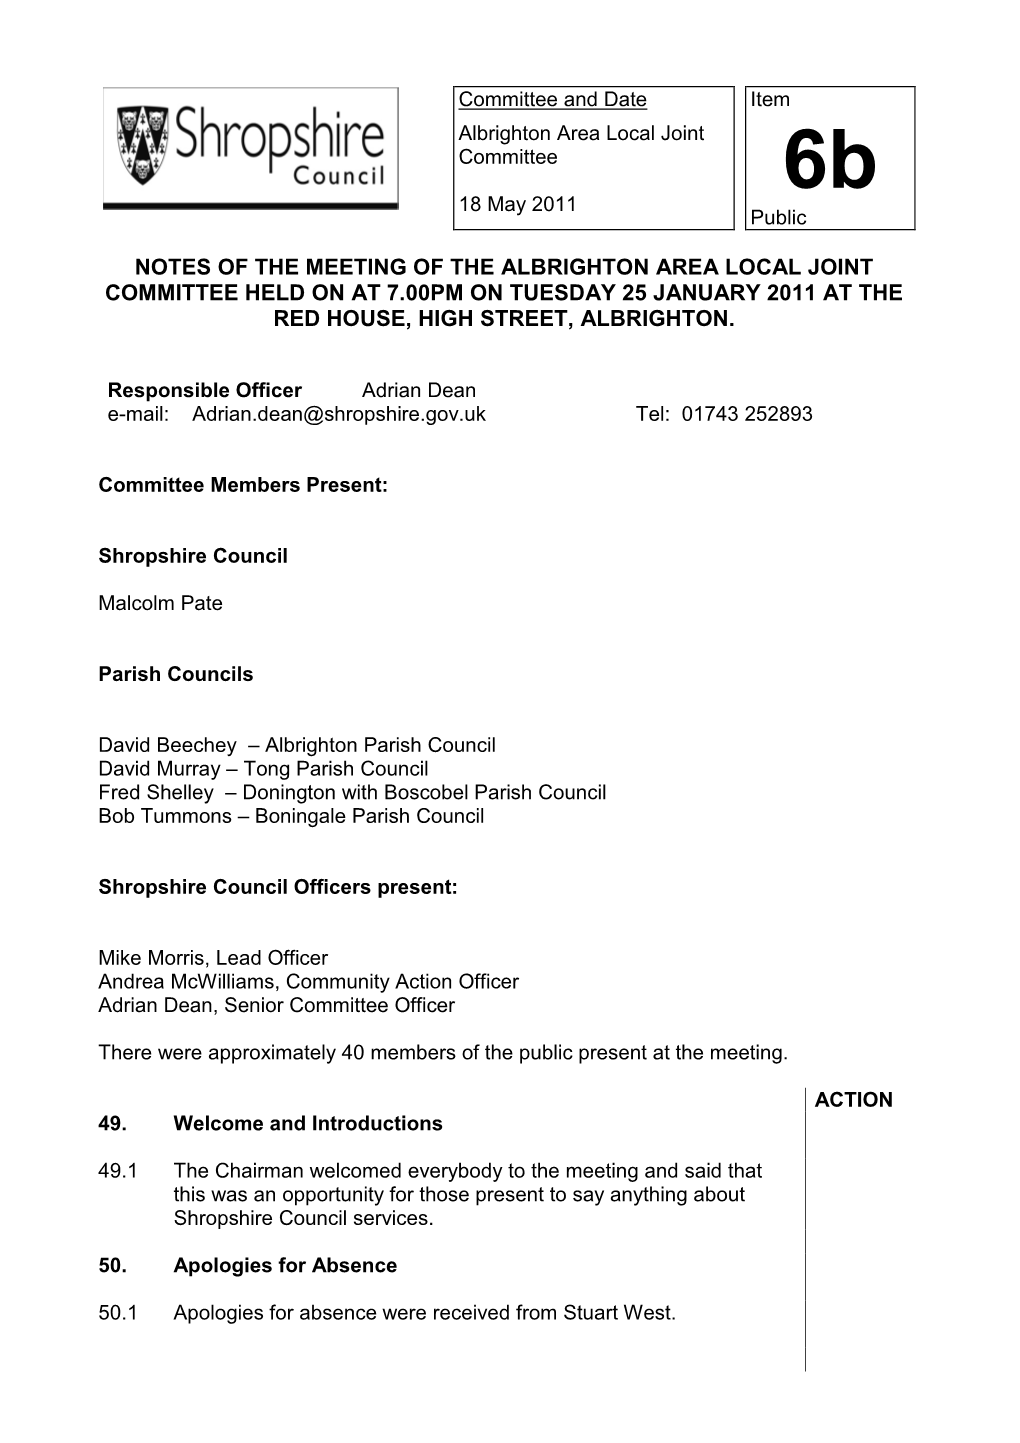 Notes of the Meeting of the Albrighton Area Local Joint Committee Held on at 7.00Pm on Tuesday 25 January 2011 at the Red House, High Street, Albrighton